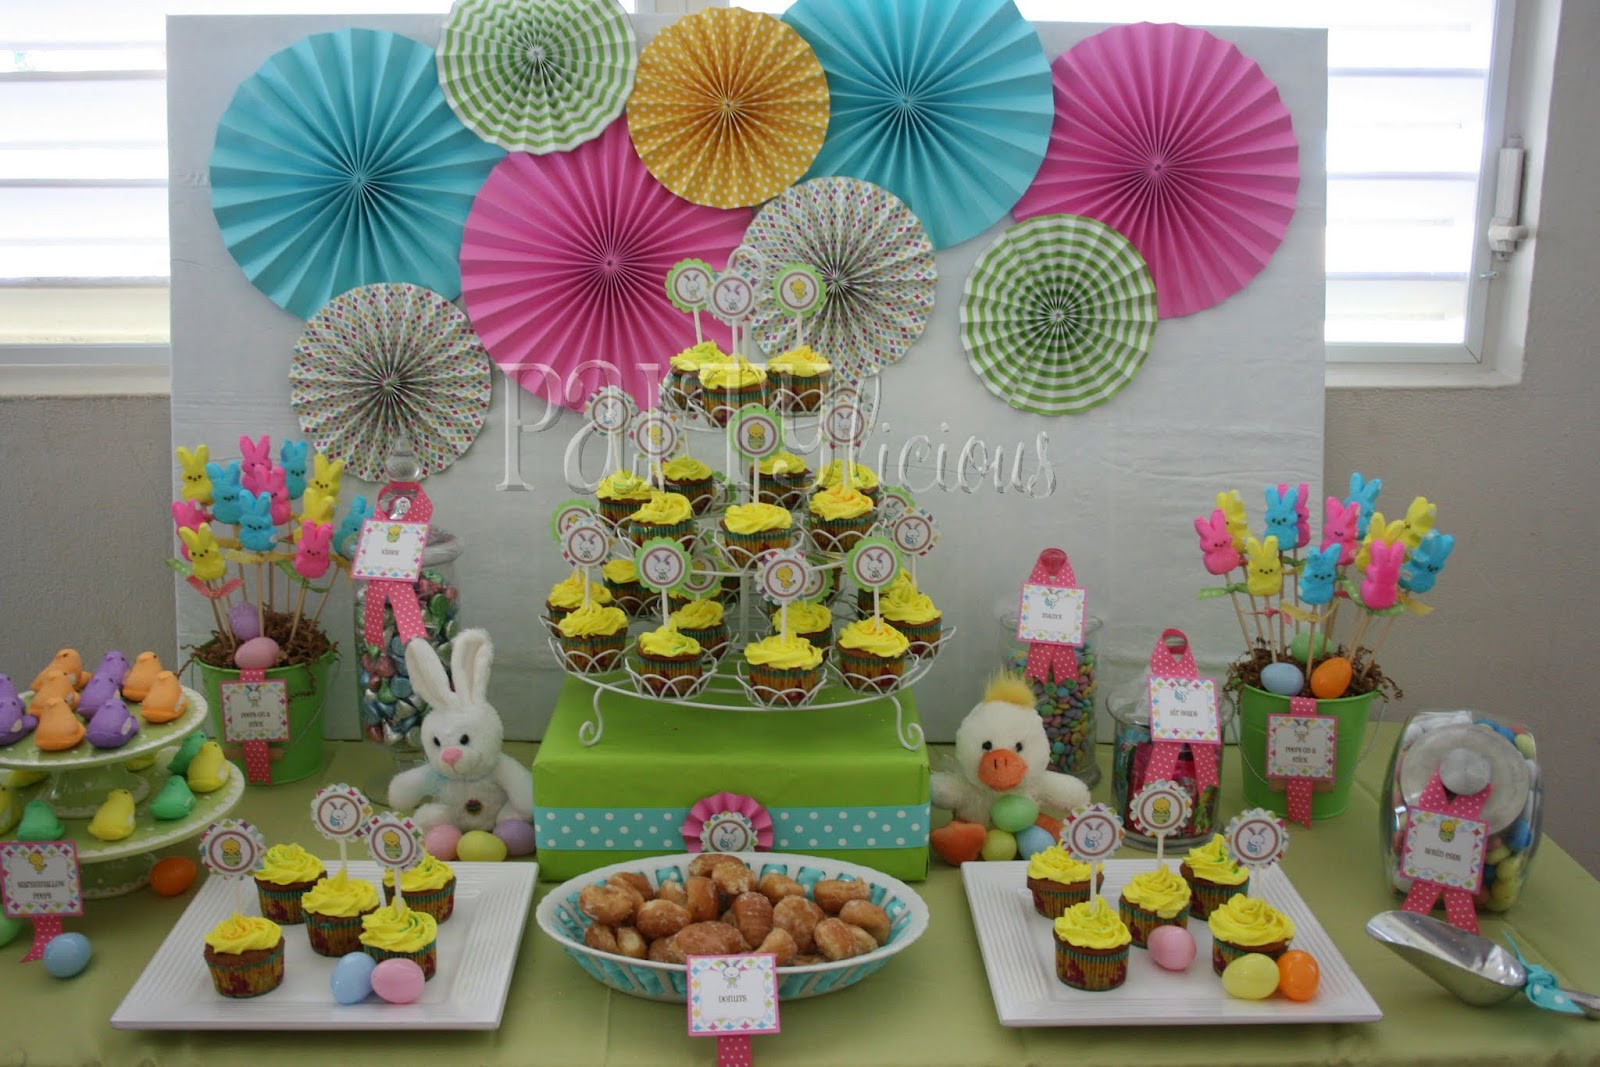 Easter Egg Hunt Birthday Party Ideas
 Partylicious Events PR Easter Egg Hunt